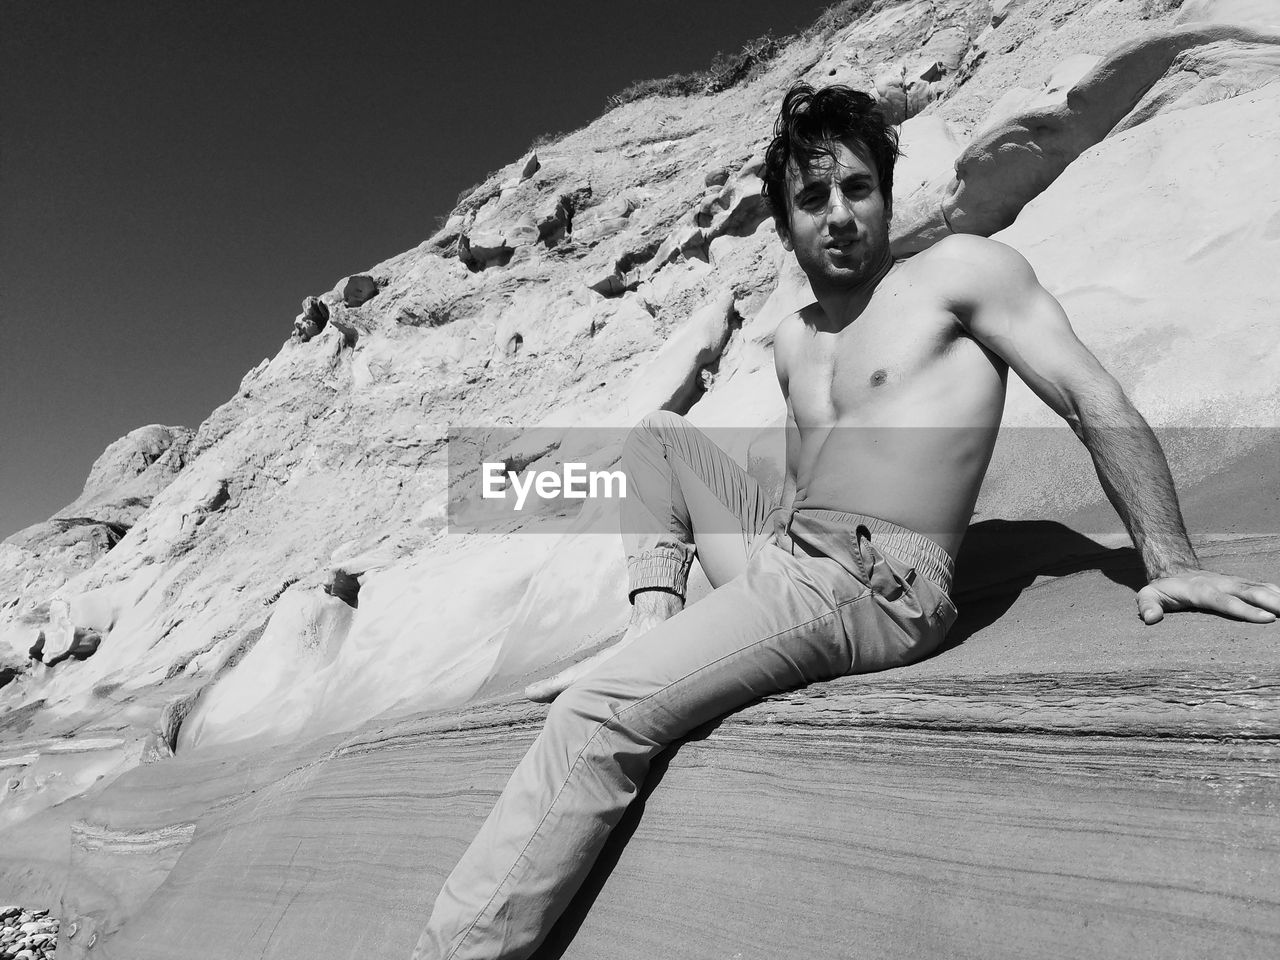 Portrait of shirtless young man sitting on rock formation